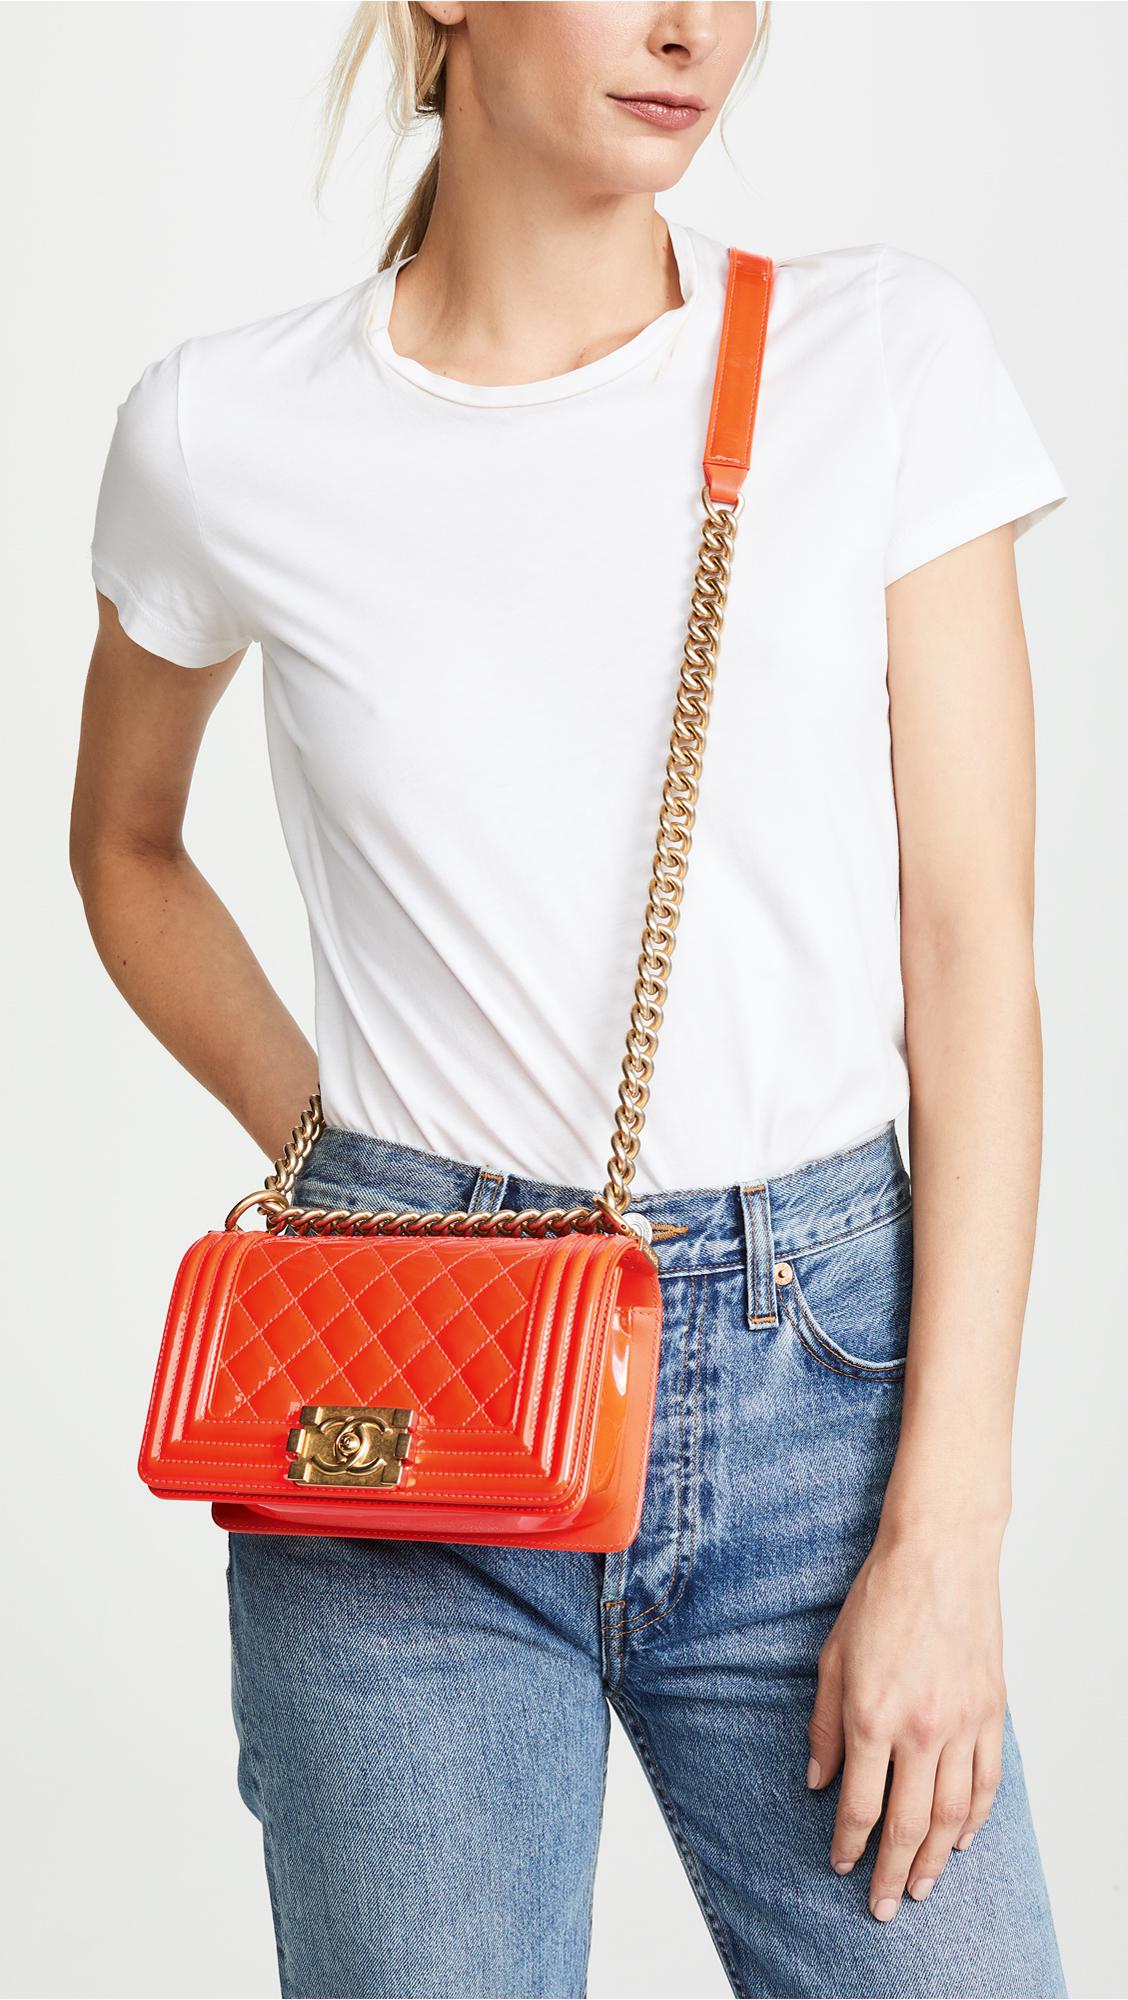 tilgivet involveret Shinkan What Goes Around Comes Around Chanel Patent Boy Small Bag in Orange | Lyst